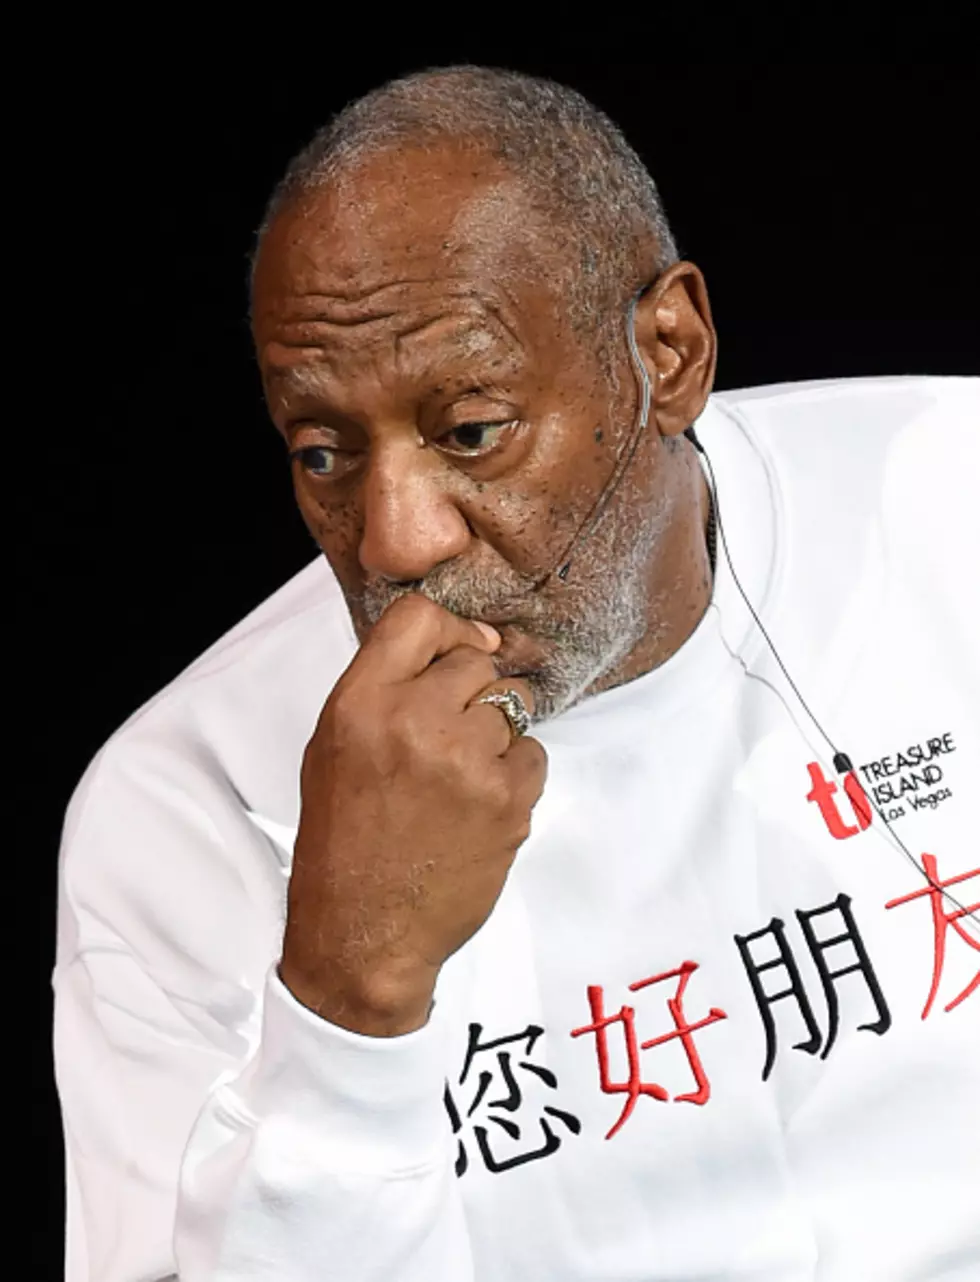 Heckler Disrupts Bill Cosby During His Stand-Up Appearance in Baltimore [Video]